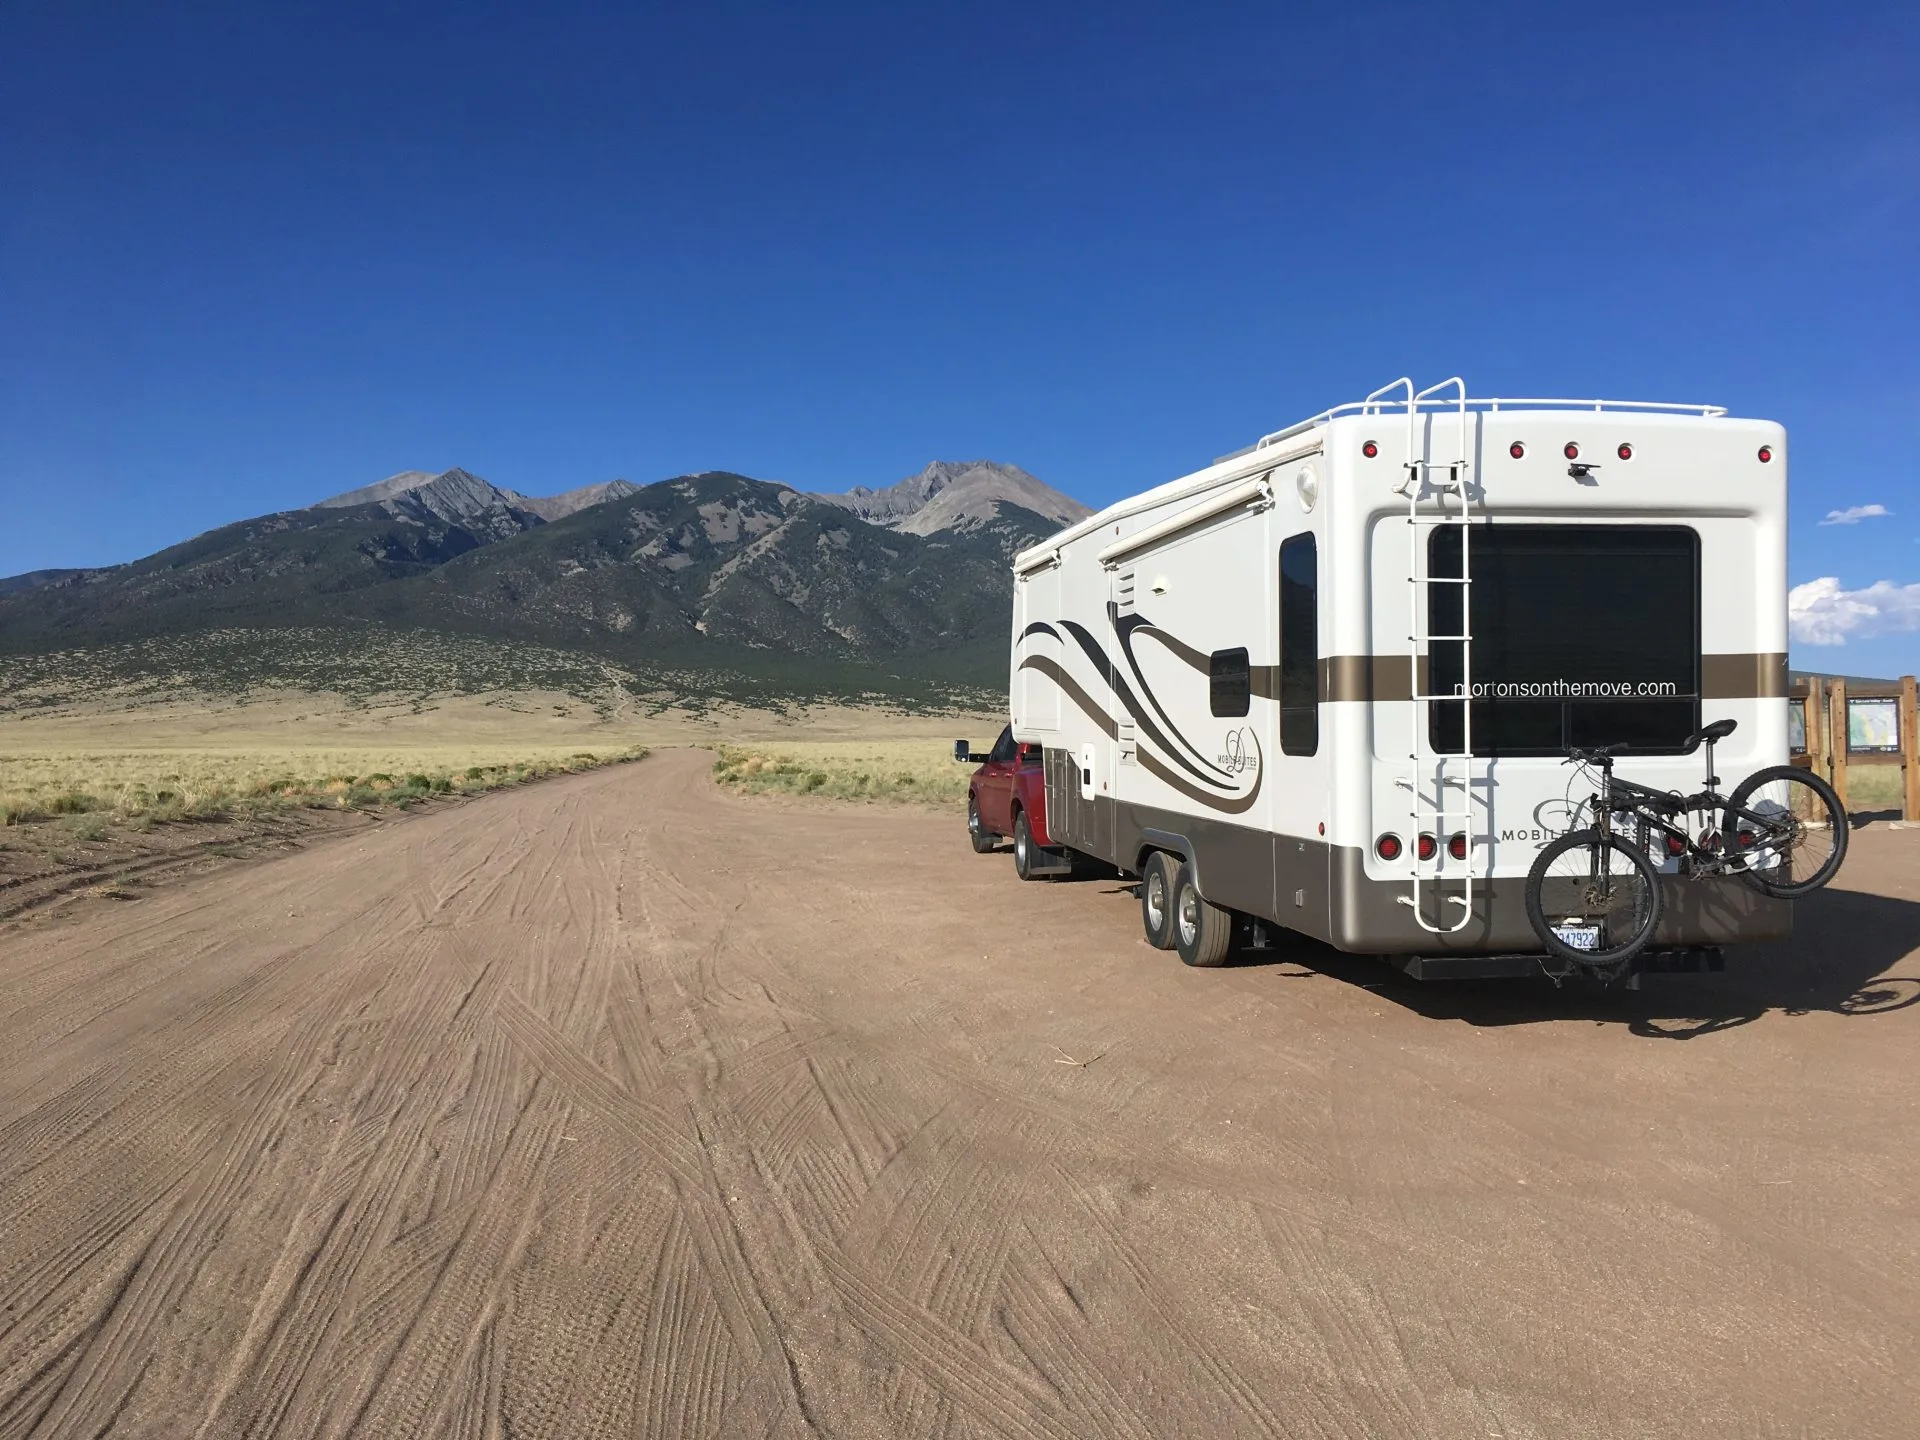 Mortons on the Move fifth wheel RV driving on dirt road.